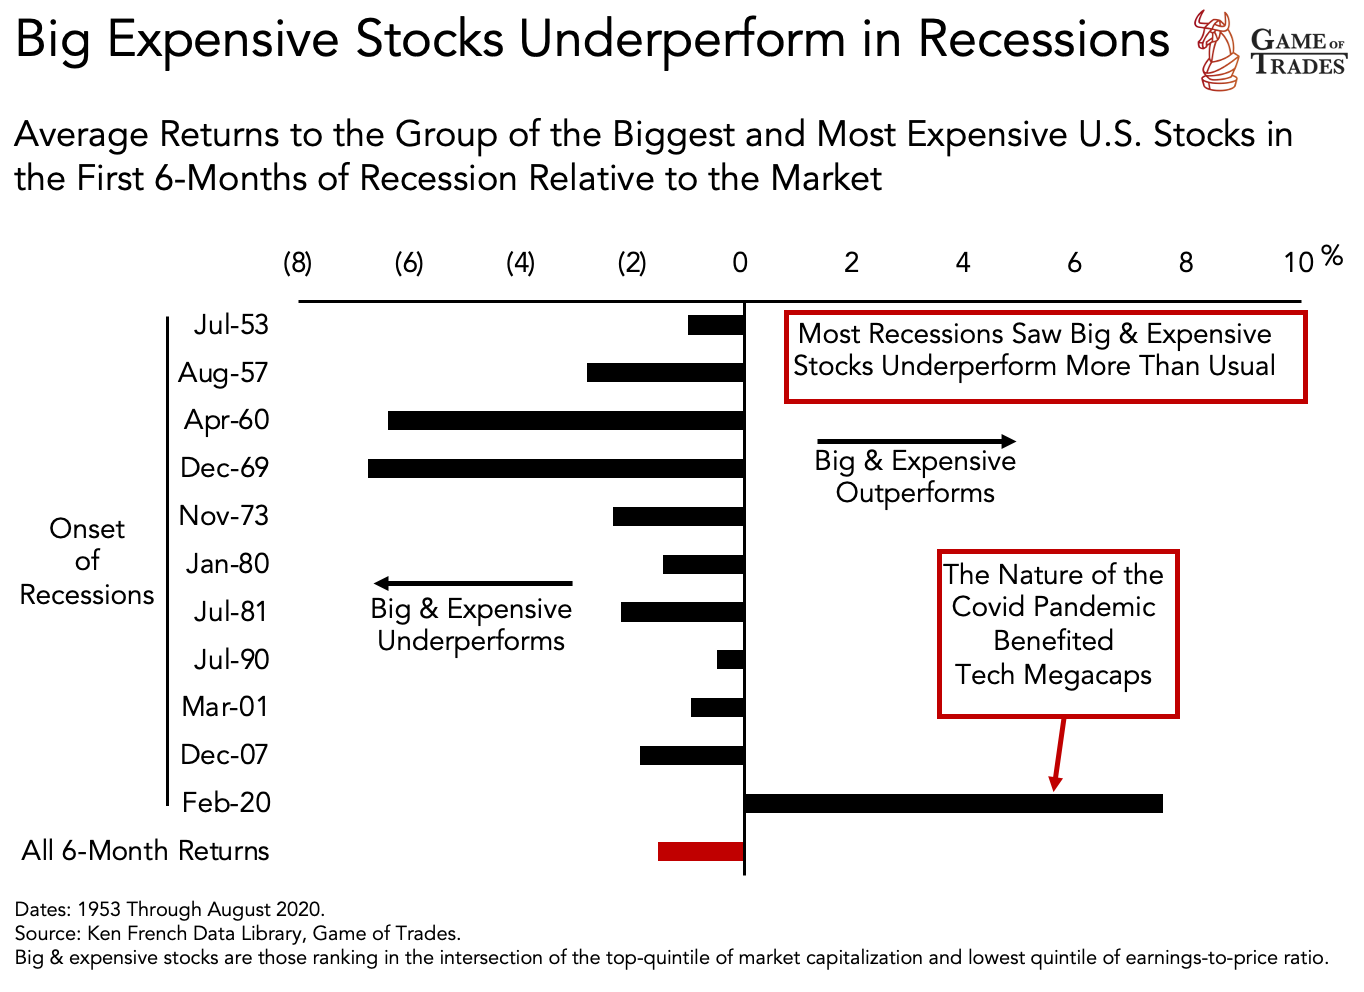 Underperfrom Stock in Recession